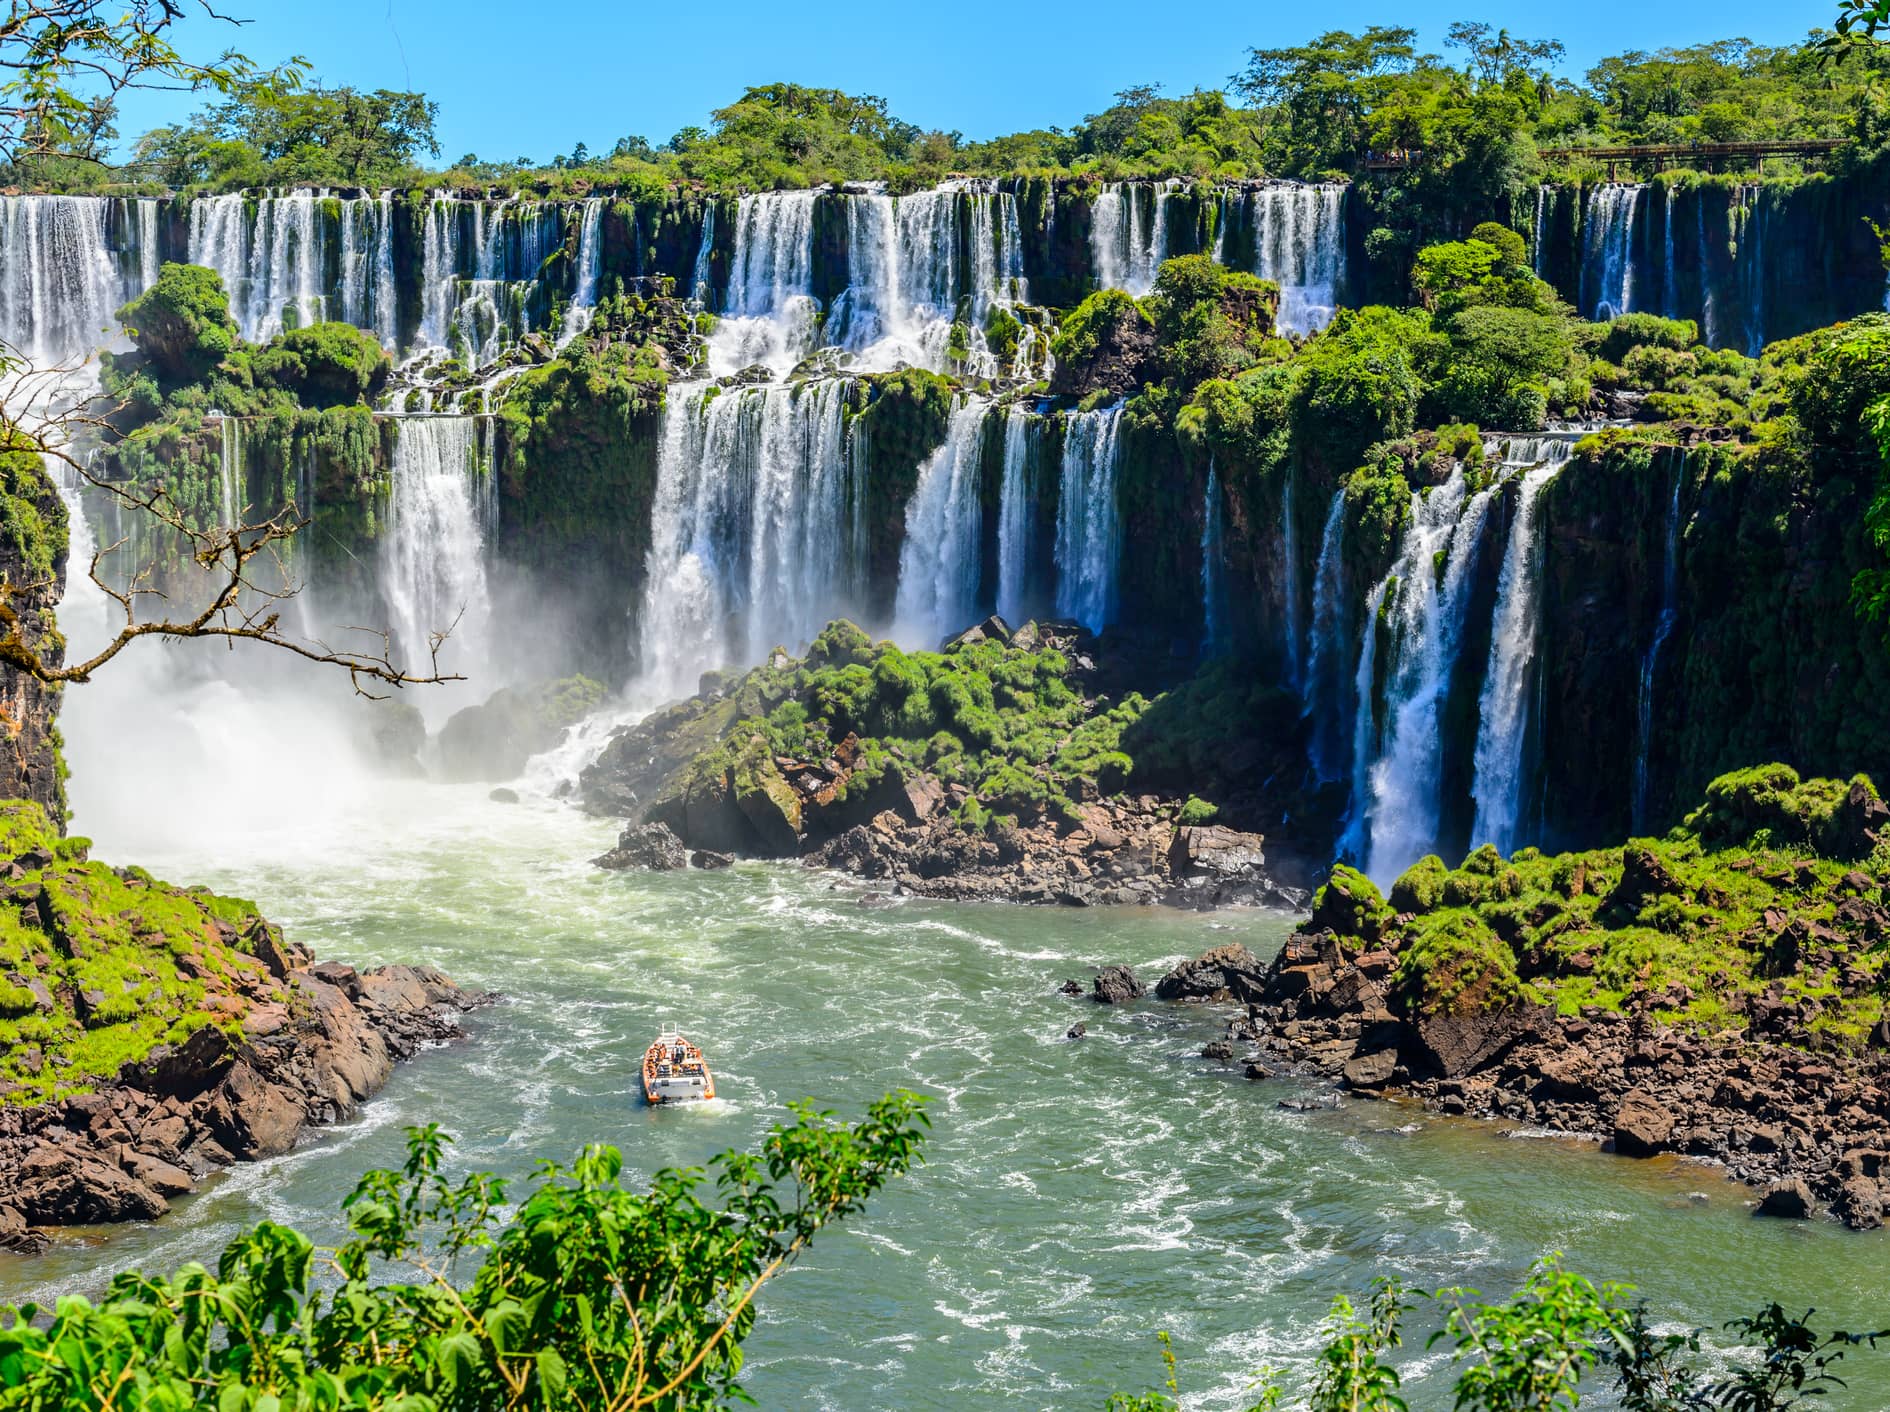  Take a day trip to the thundering Iguazú Falls by Private Jet.  